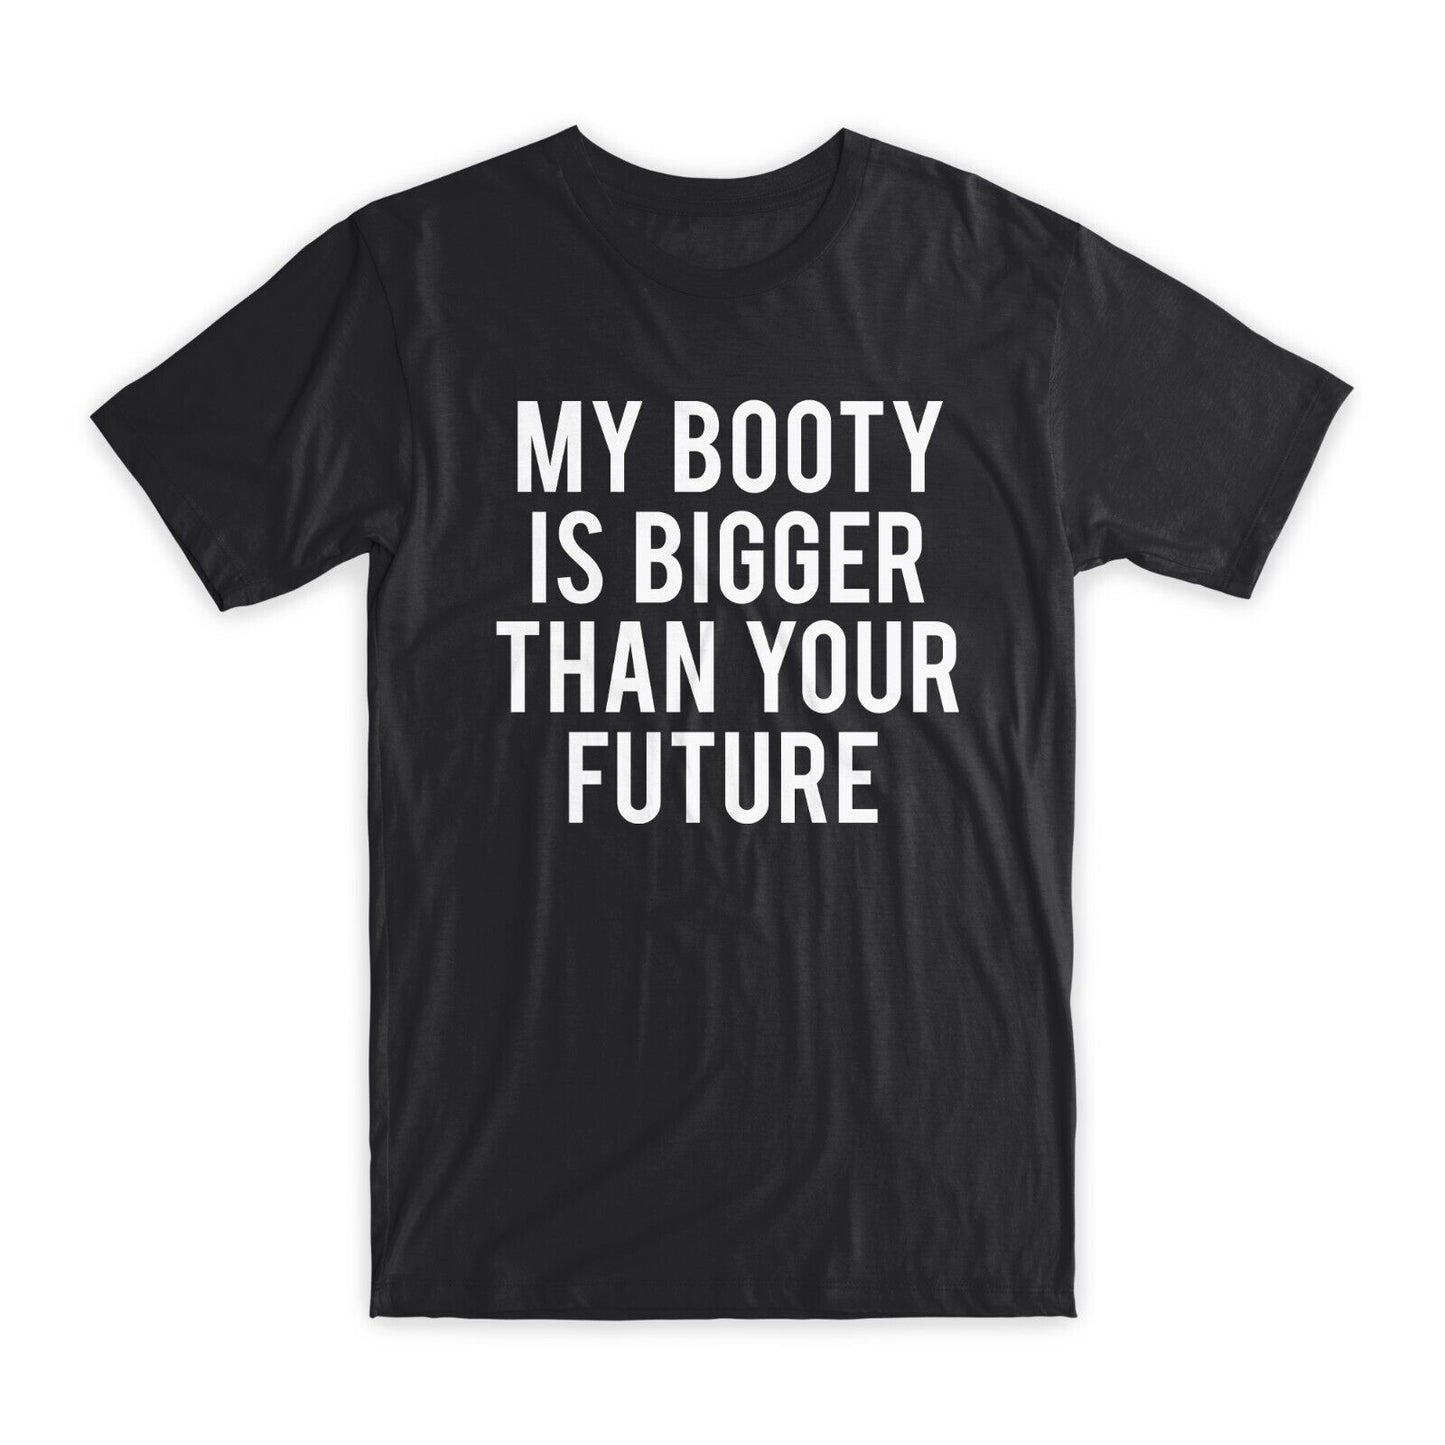 My Booty is Bigger Than Your Future T-Shirt Premium Soft Cotton Funny T Gift NEW